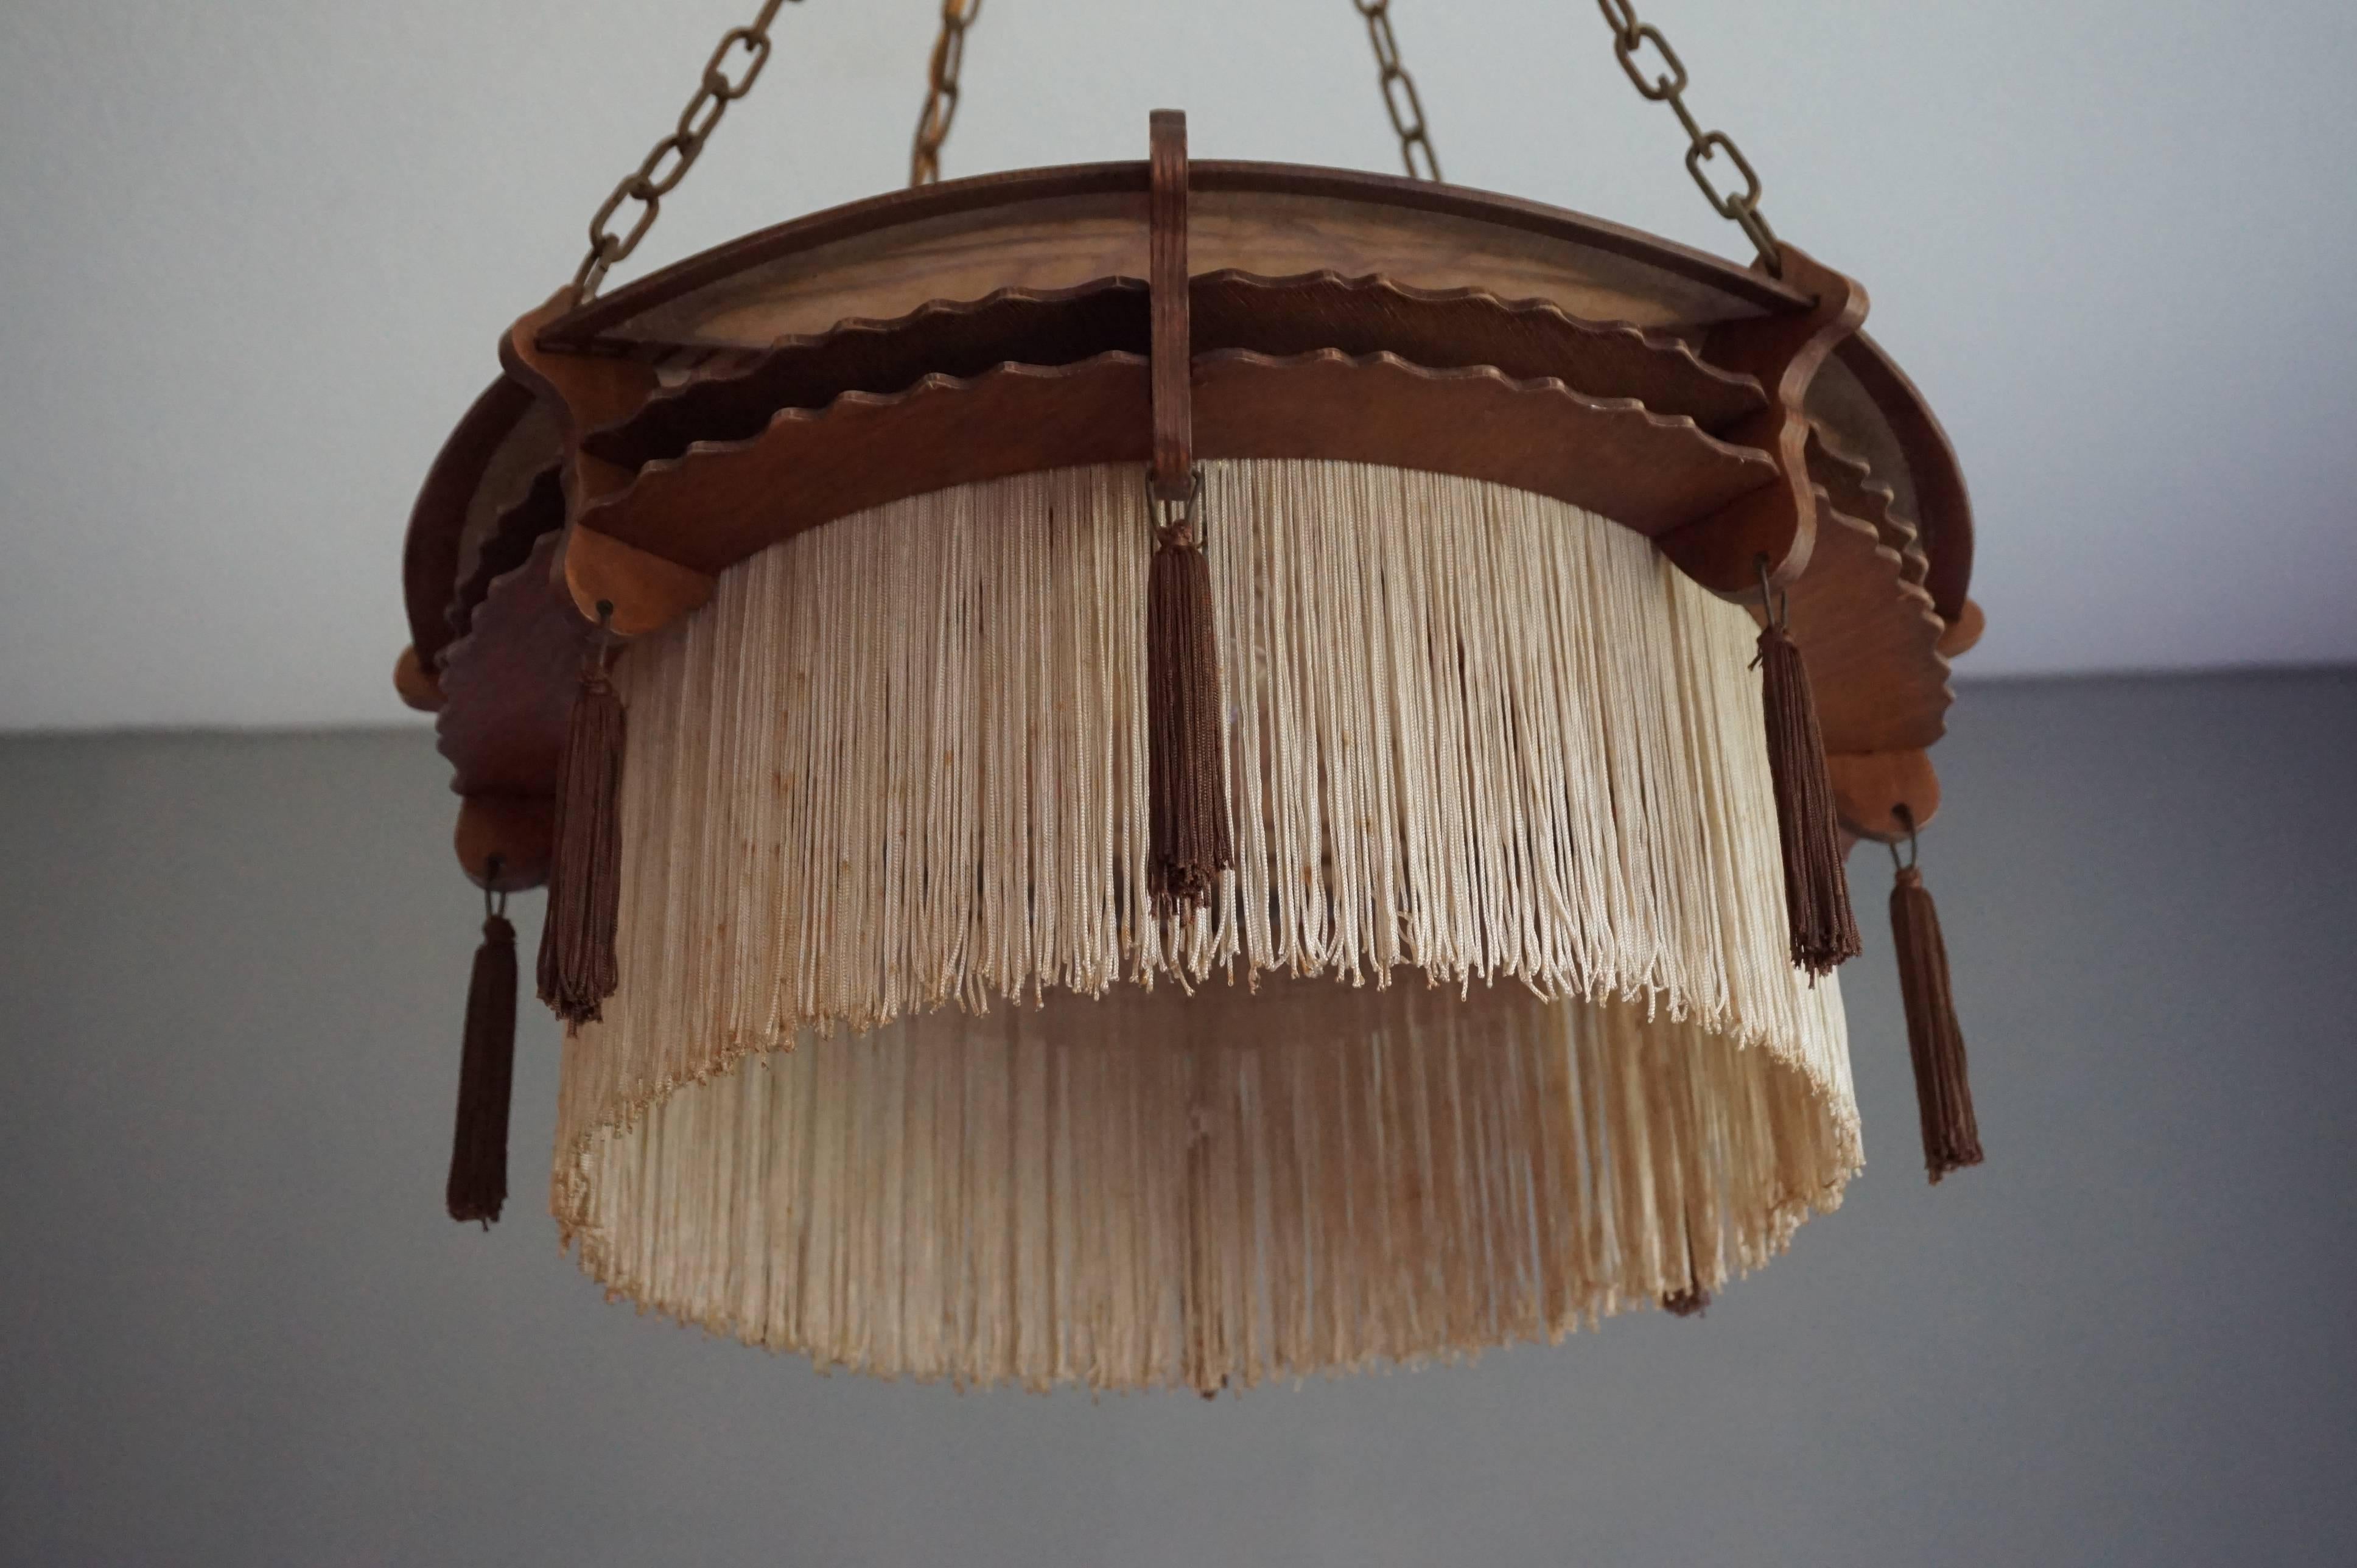 Hand-Crafted Early 20th Century Arts & Crafts Handsawn Wooden Pendant with Tassels & Fringes